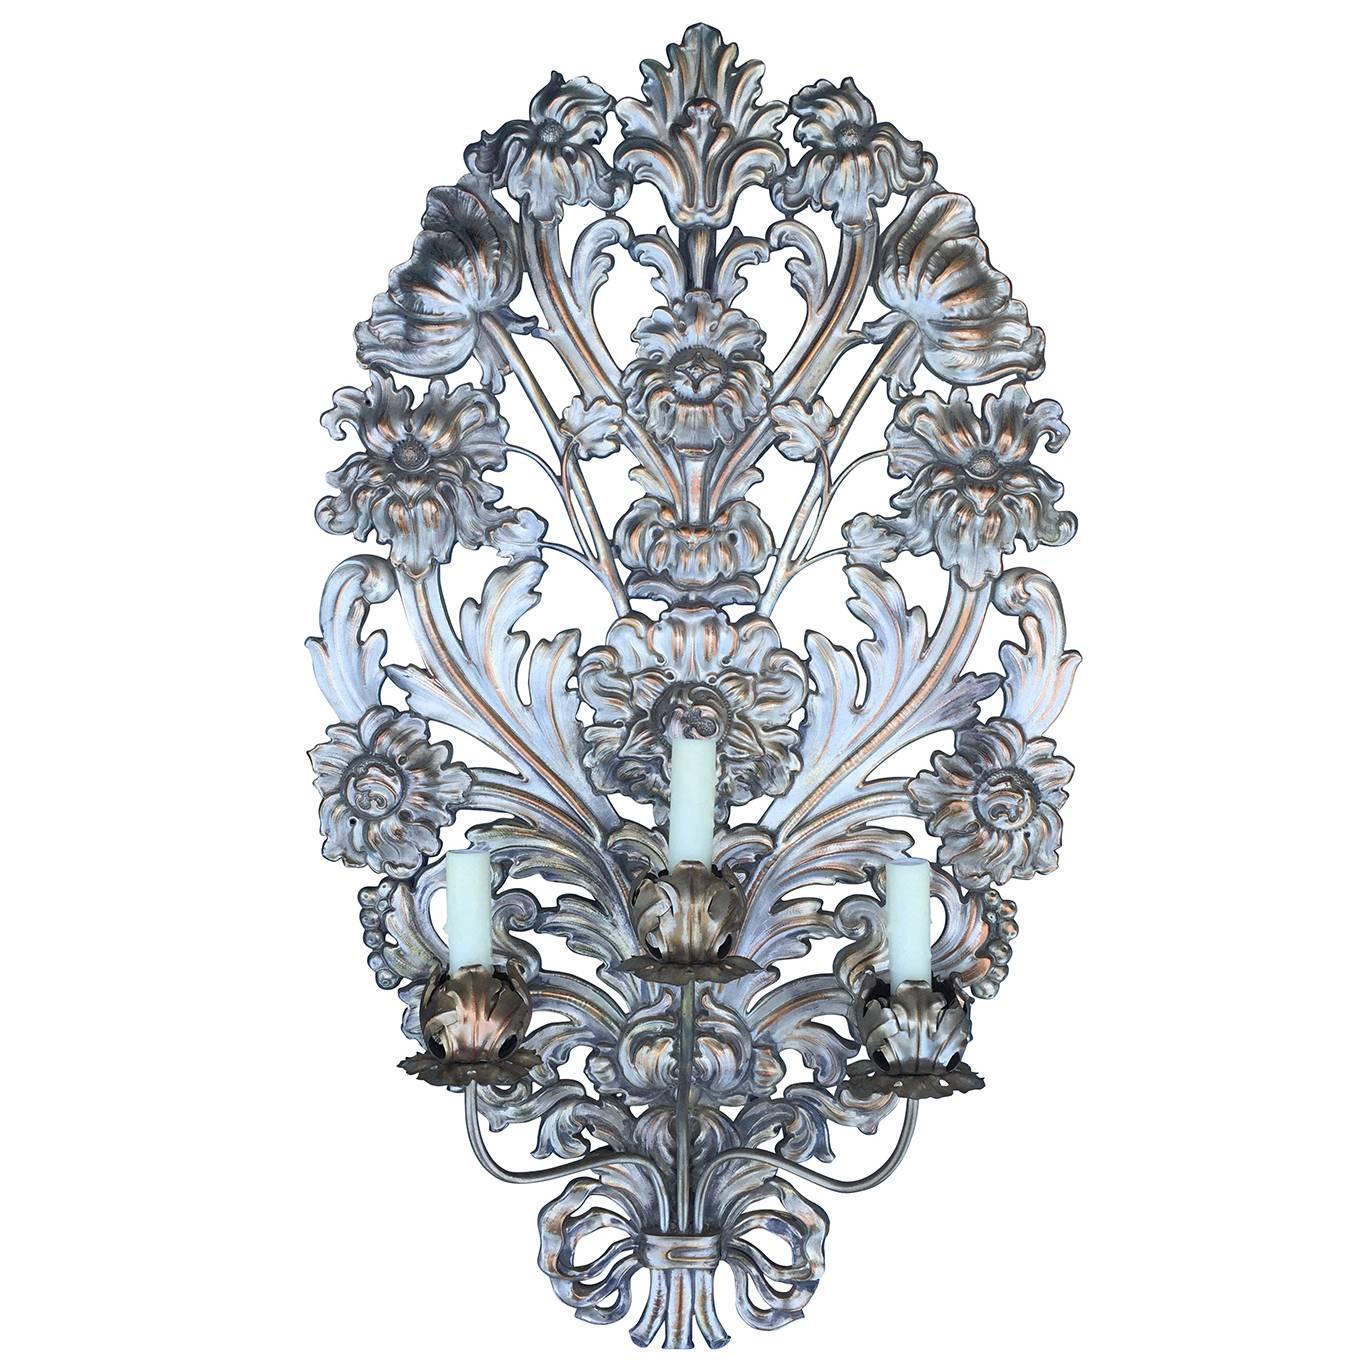 Very Large 19th-20th Century Italian Silvered Appliqué Sconce For Sale